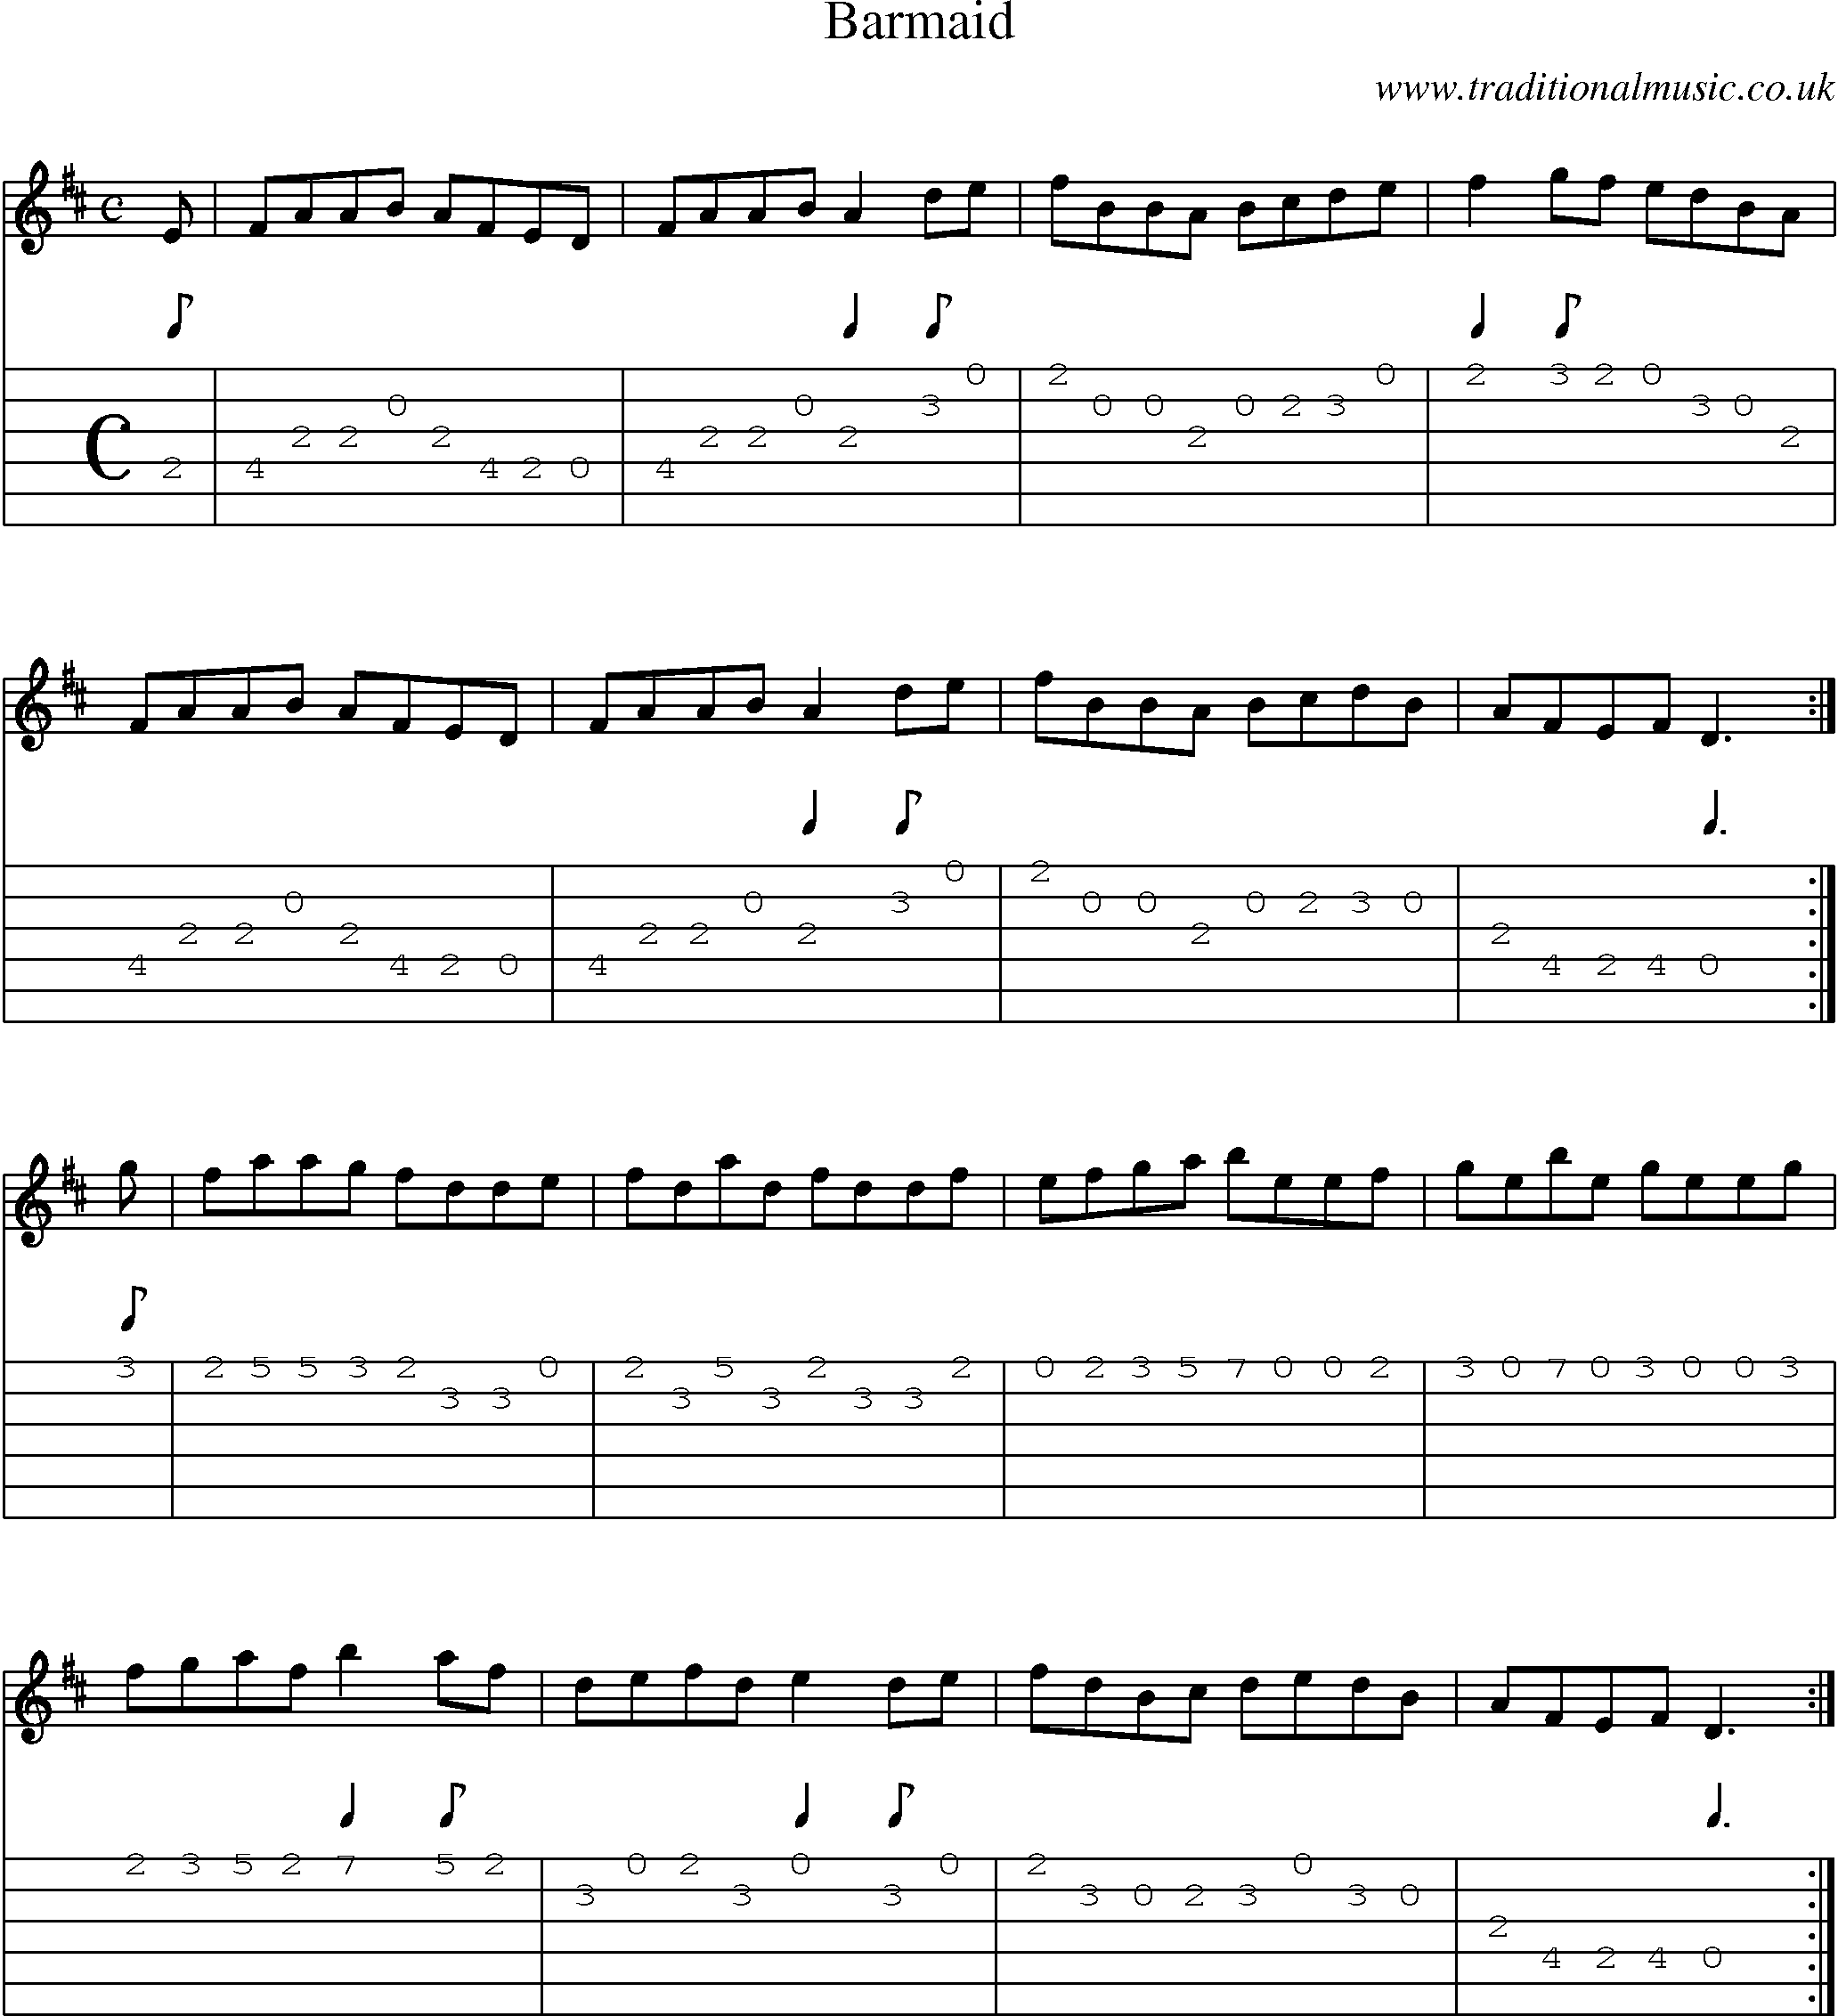 Music Score and Guitar Tabs for Barmaid